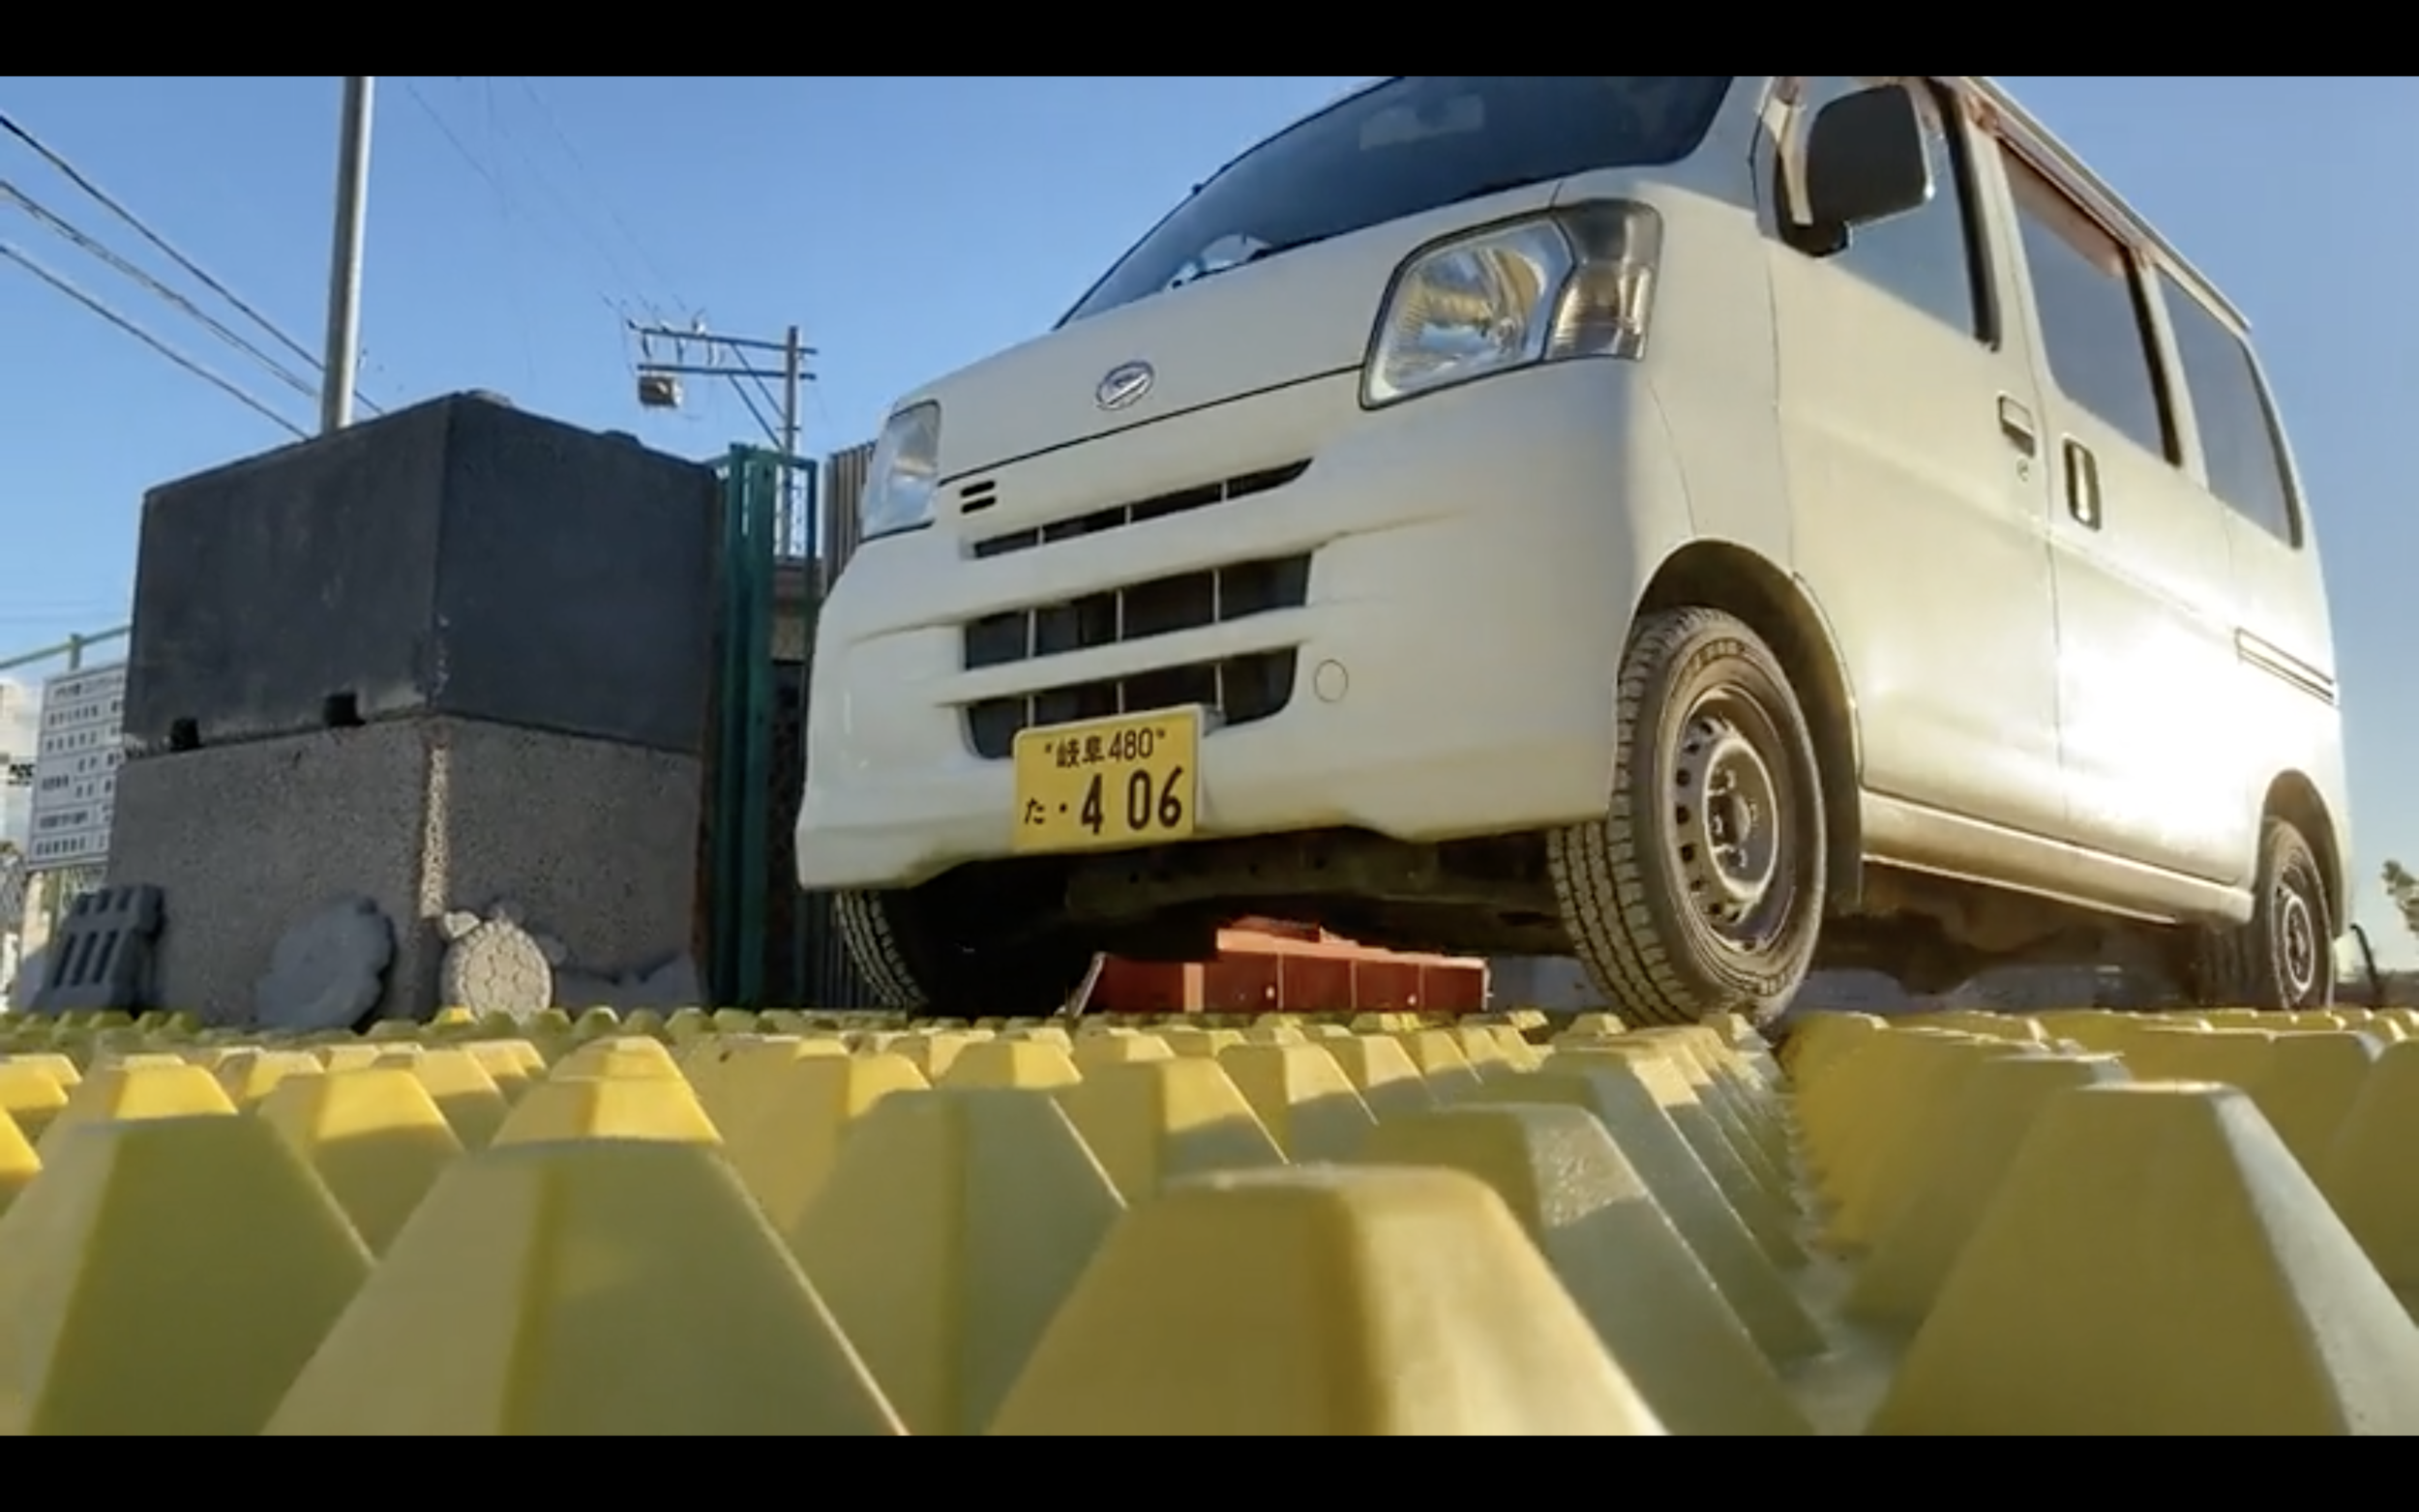 Small-Tires-Driving-Over-Japan-Construciton-Site-Entrance-Road-Vehicle-Tracking-System-Japan-Ministry-Of-The-Environment-Contain-Contaminated-Soil-Toxic-Radioactive-Sediement-Water-Quality-Construction-Entrance.png